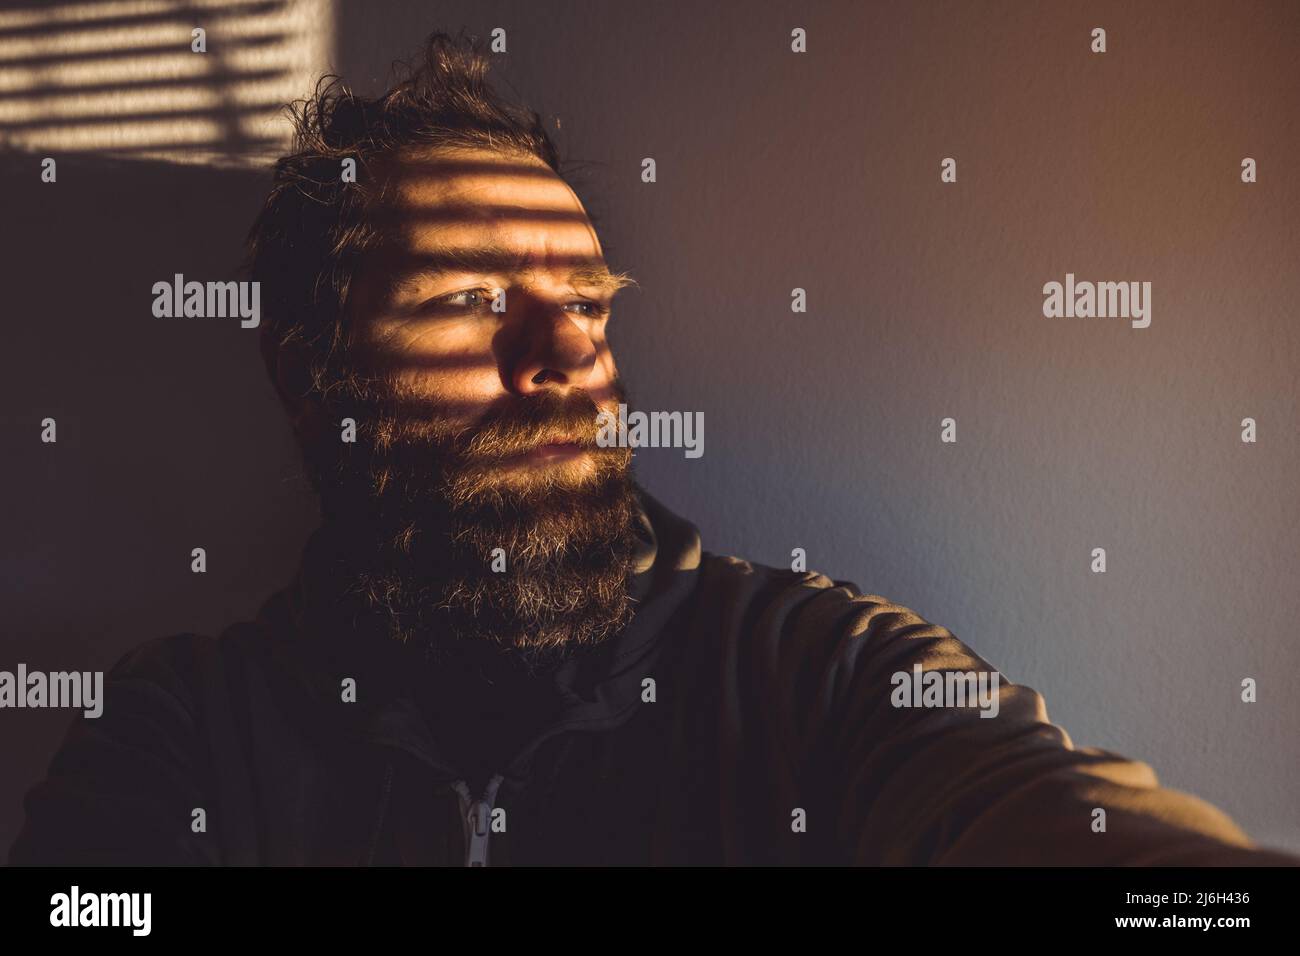 Hipster looking man hiding behind the venetian blinds or window shades. Cool guy wearng a hoodie in an interesting lighting. Stock Photo